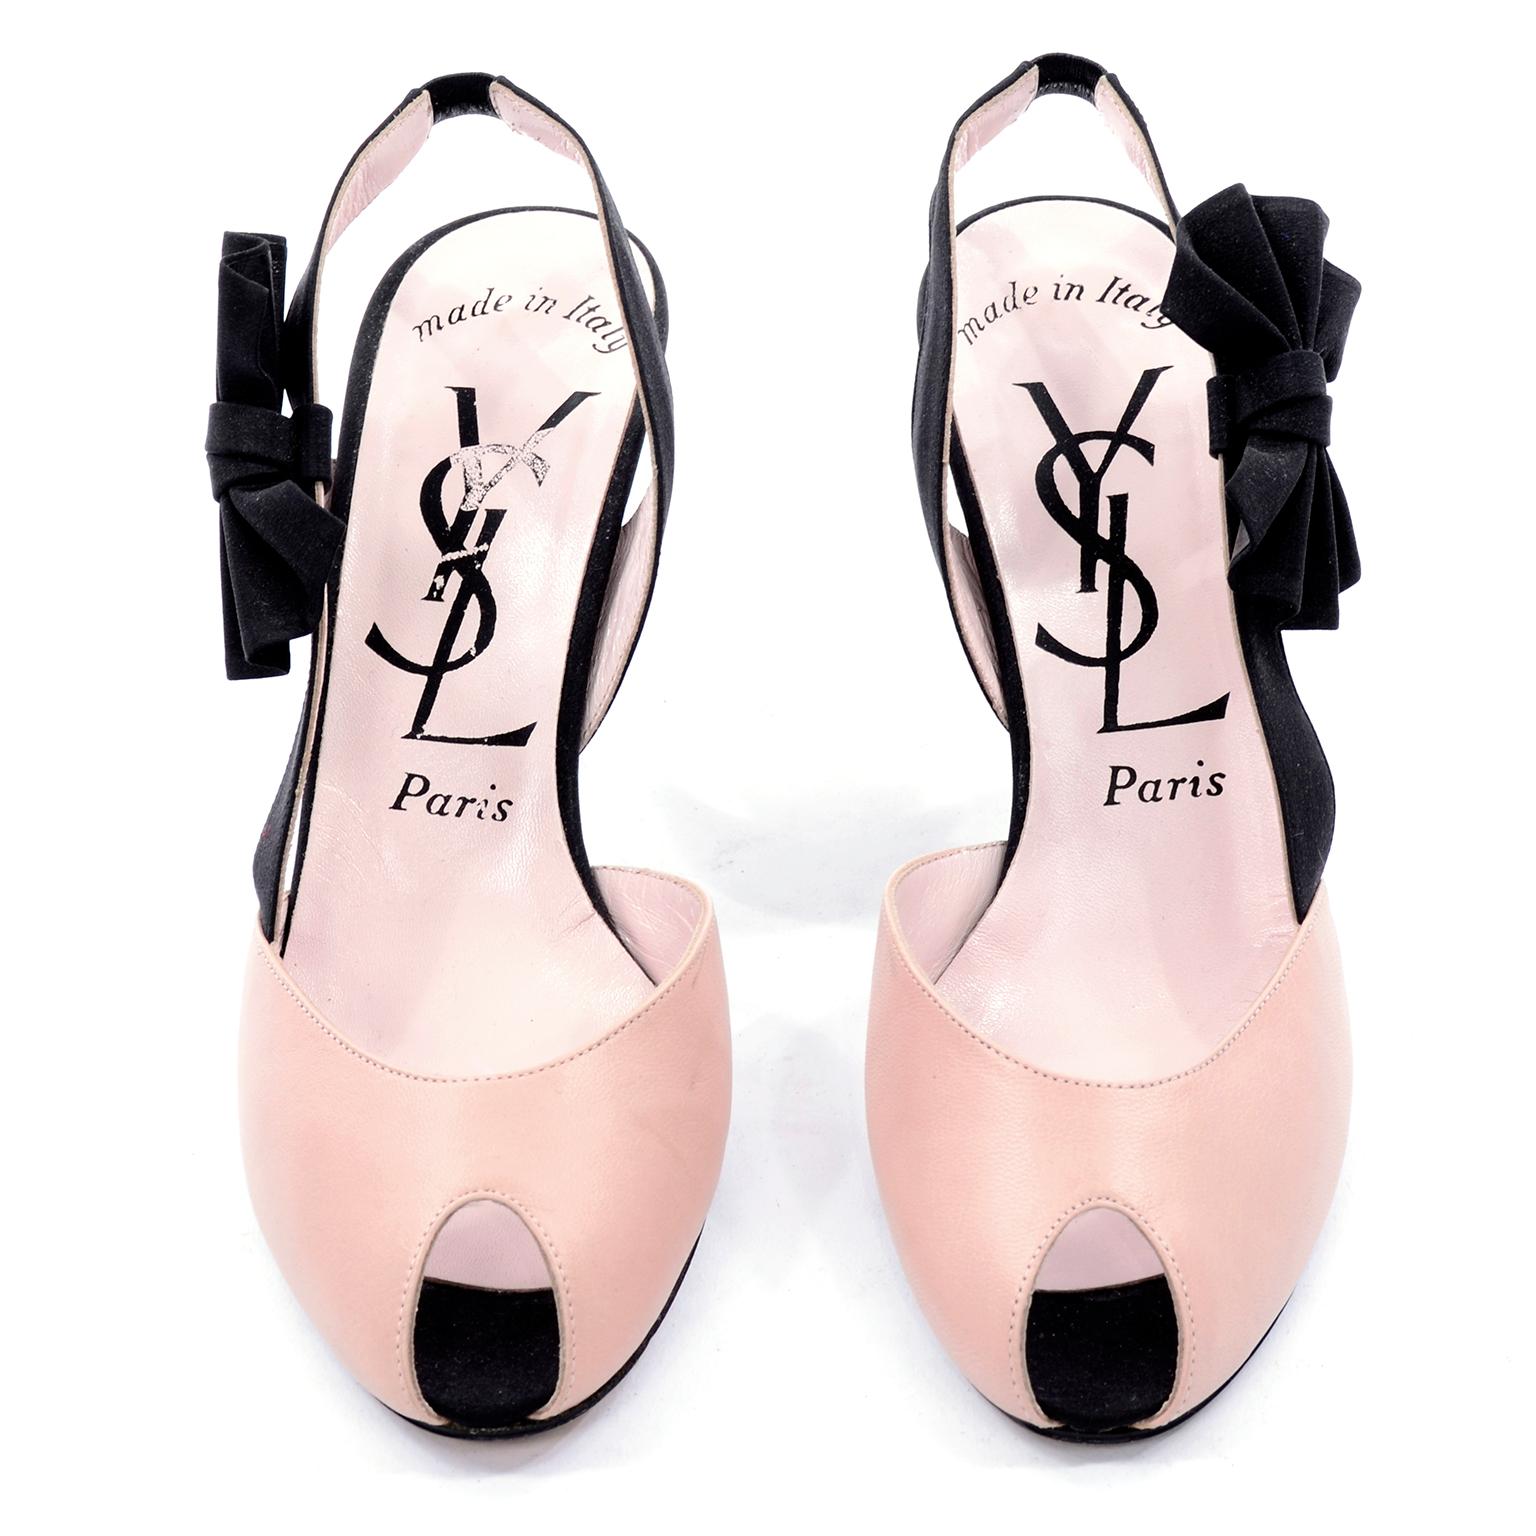 These are pink and black Yves Saint Laurent heels with a peep toe and black bow on the outer side of the slingback strap. They have pale pink leather uppers and a black strap and heel. Made in Italy.  
Size 7.5 N. 
HEEL: 3.75